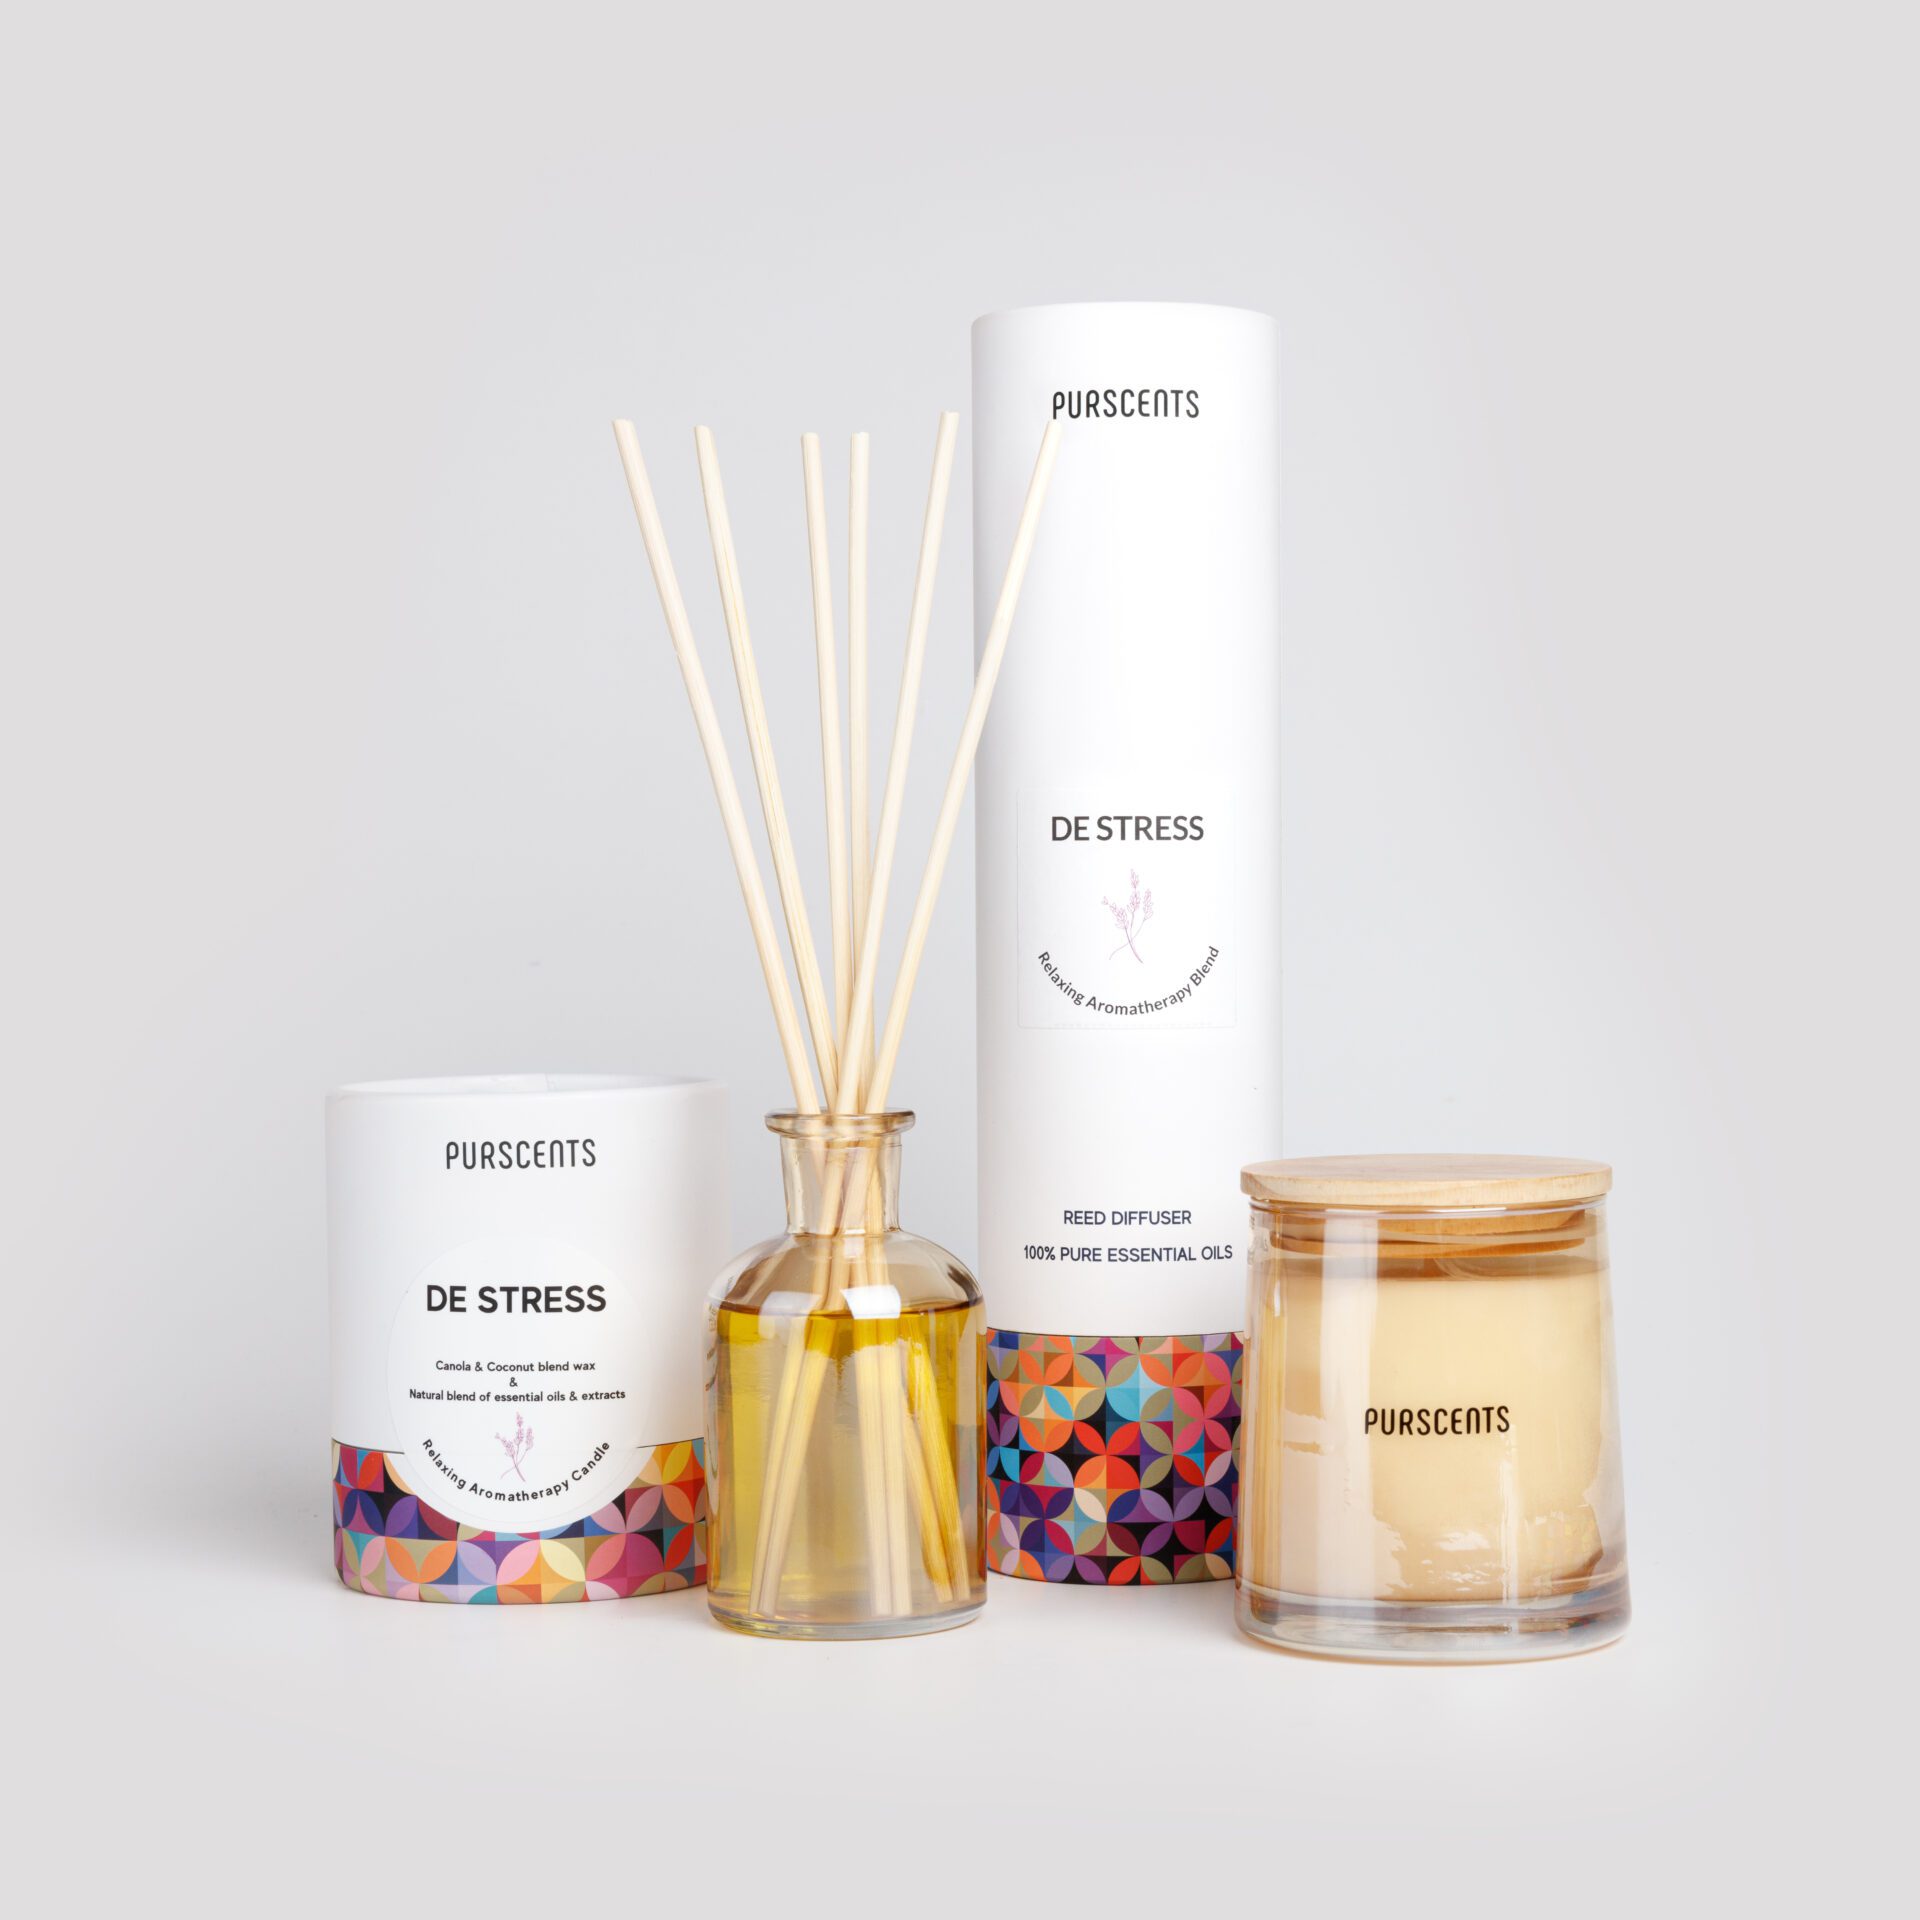 De Stress Scented Candle & Reed Diffuser Duo